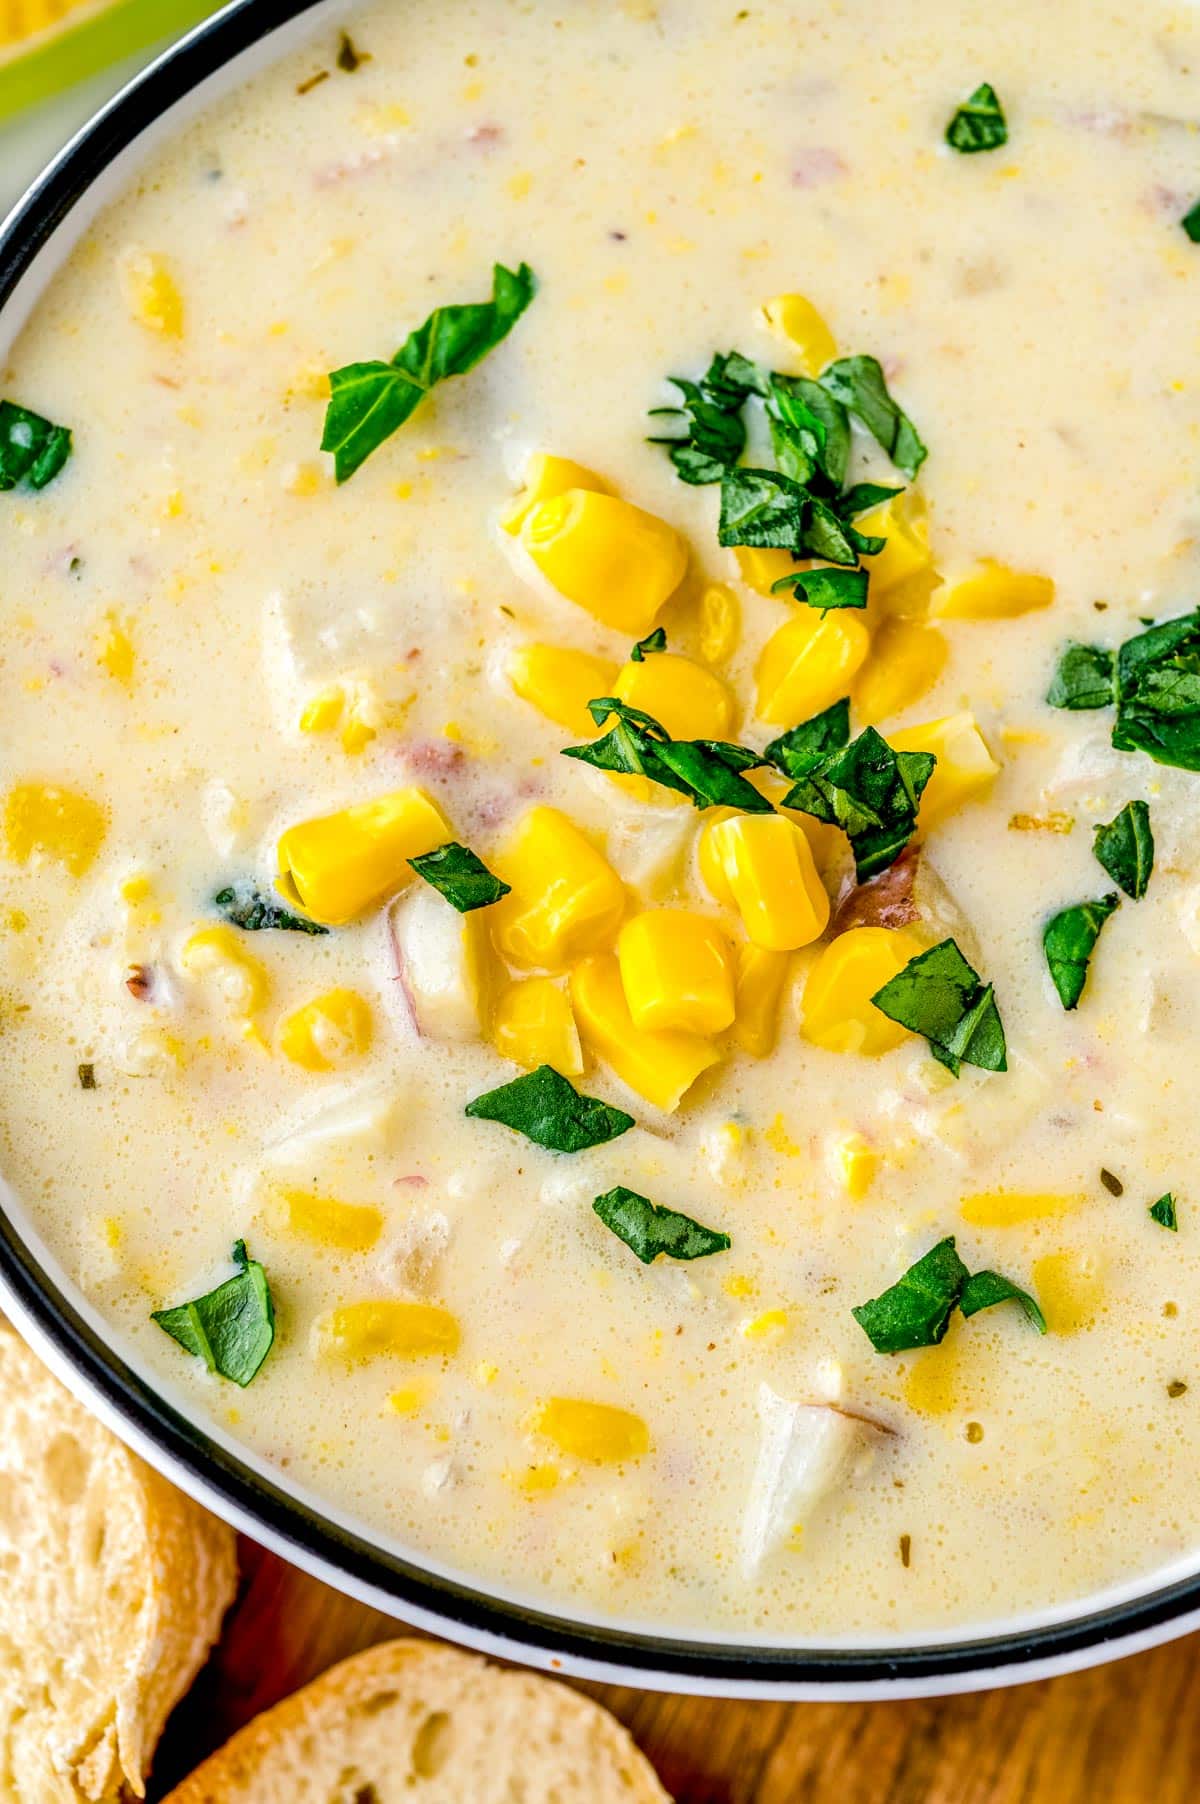 A close up picture of the finished Potato Corn Chowder.